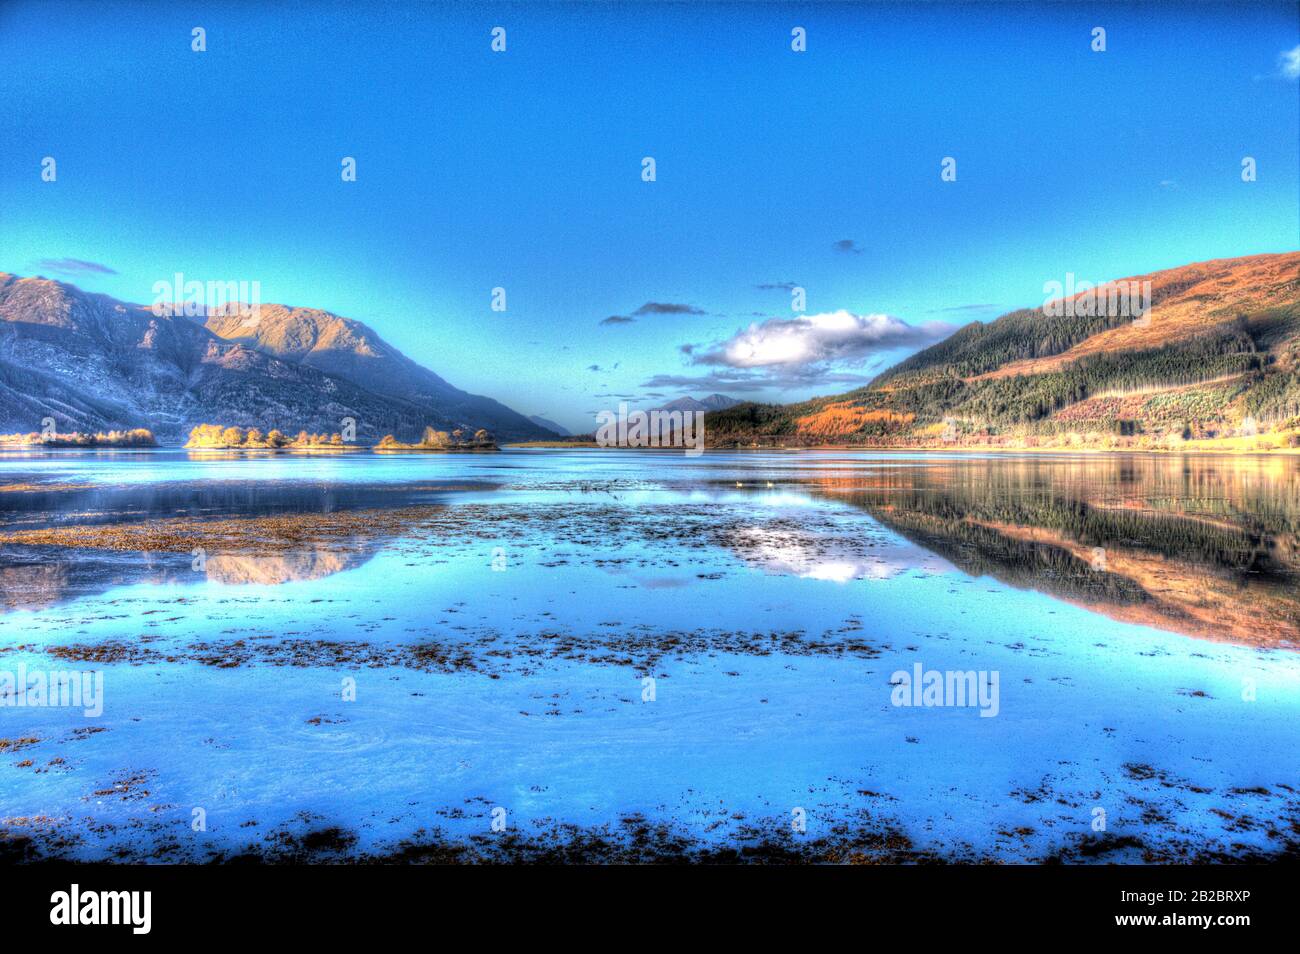 Area of Glencoe, Scotland. Artistic morning view of Loch Leven looking west towards North Ballachulish from the shores of Invercoe. Stock Photo